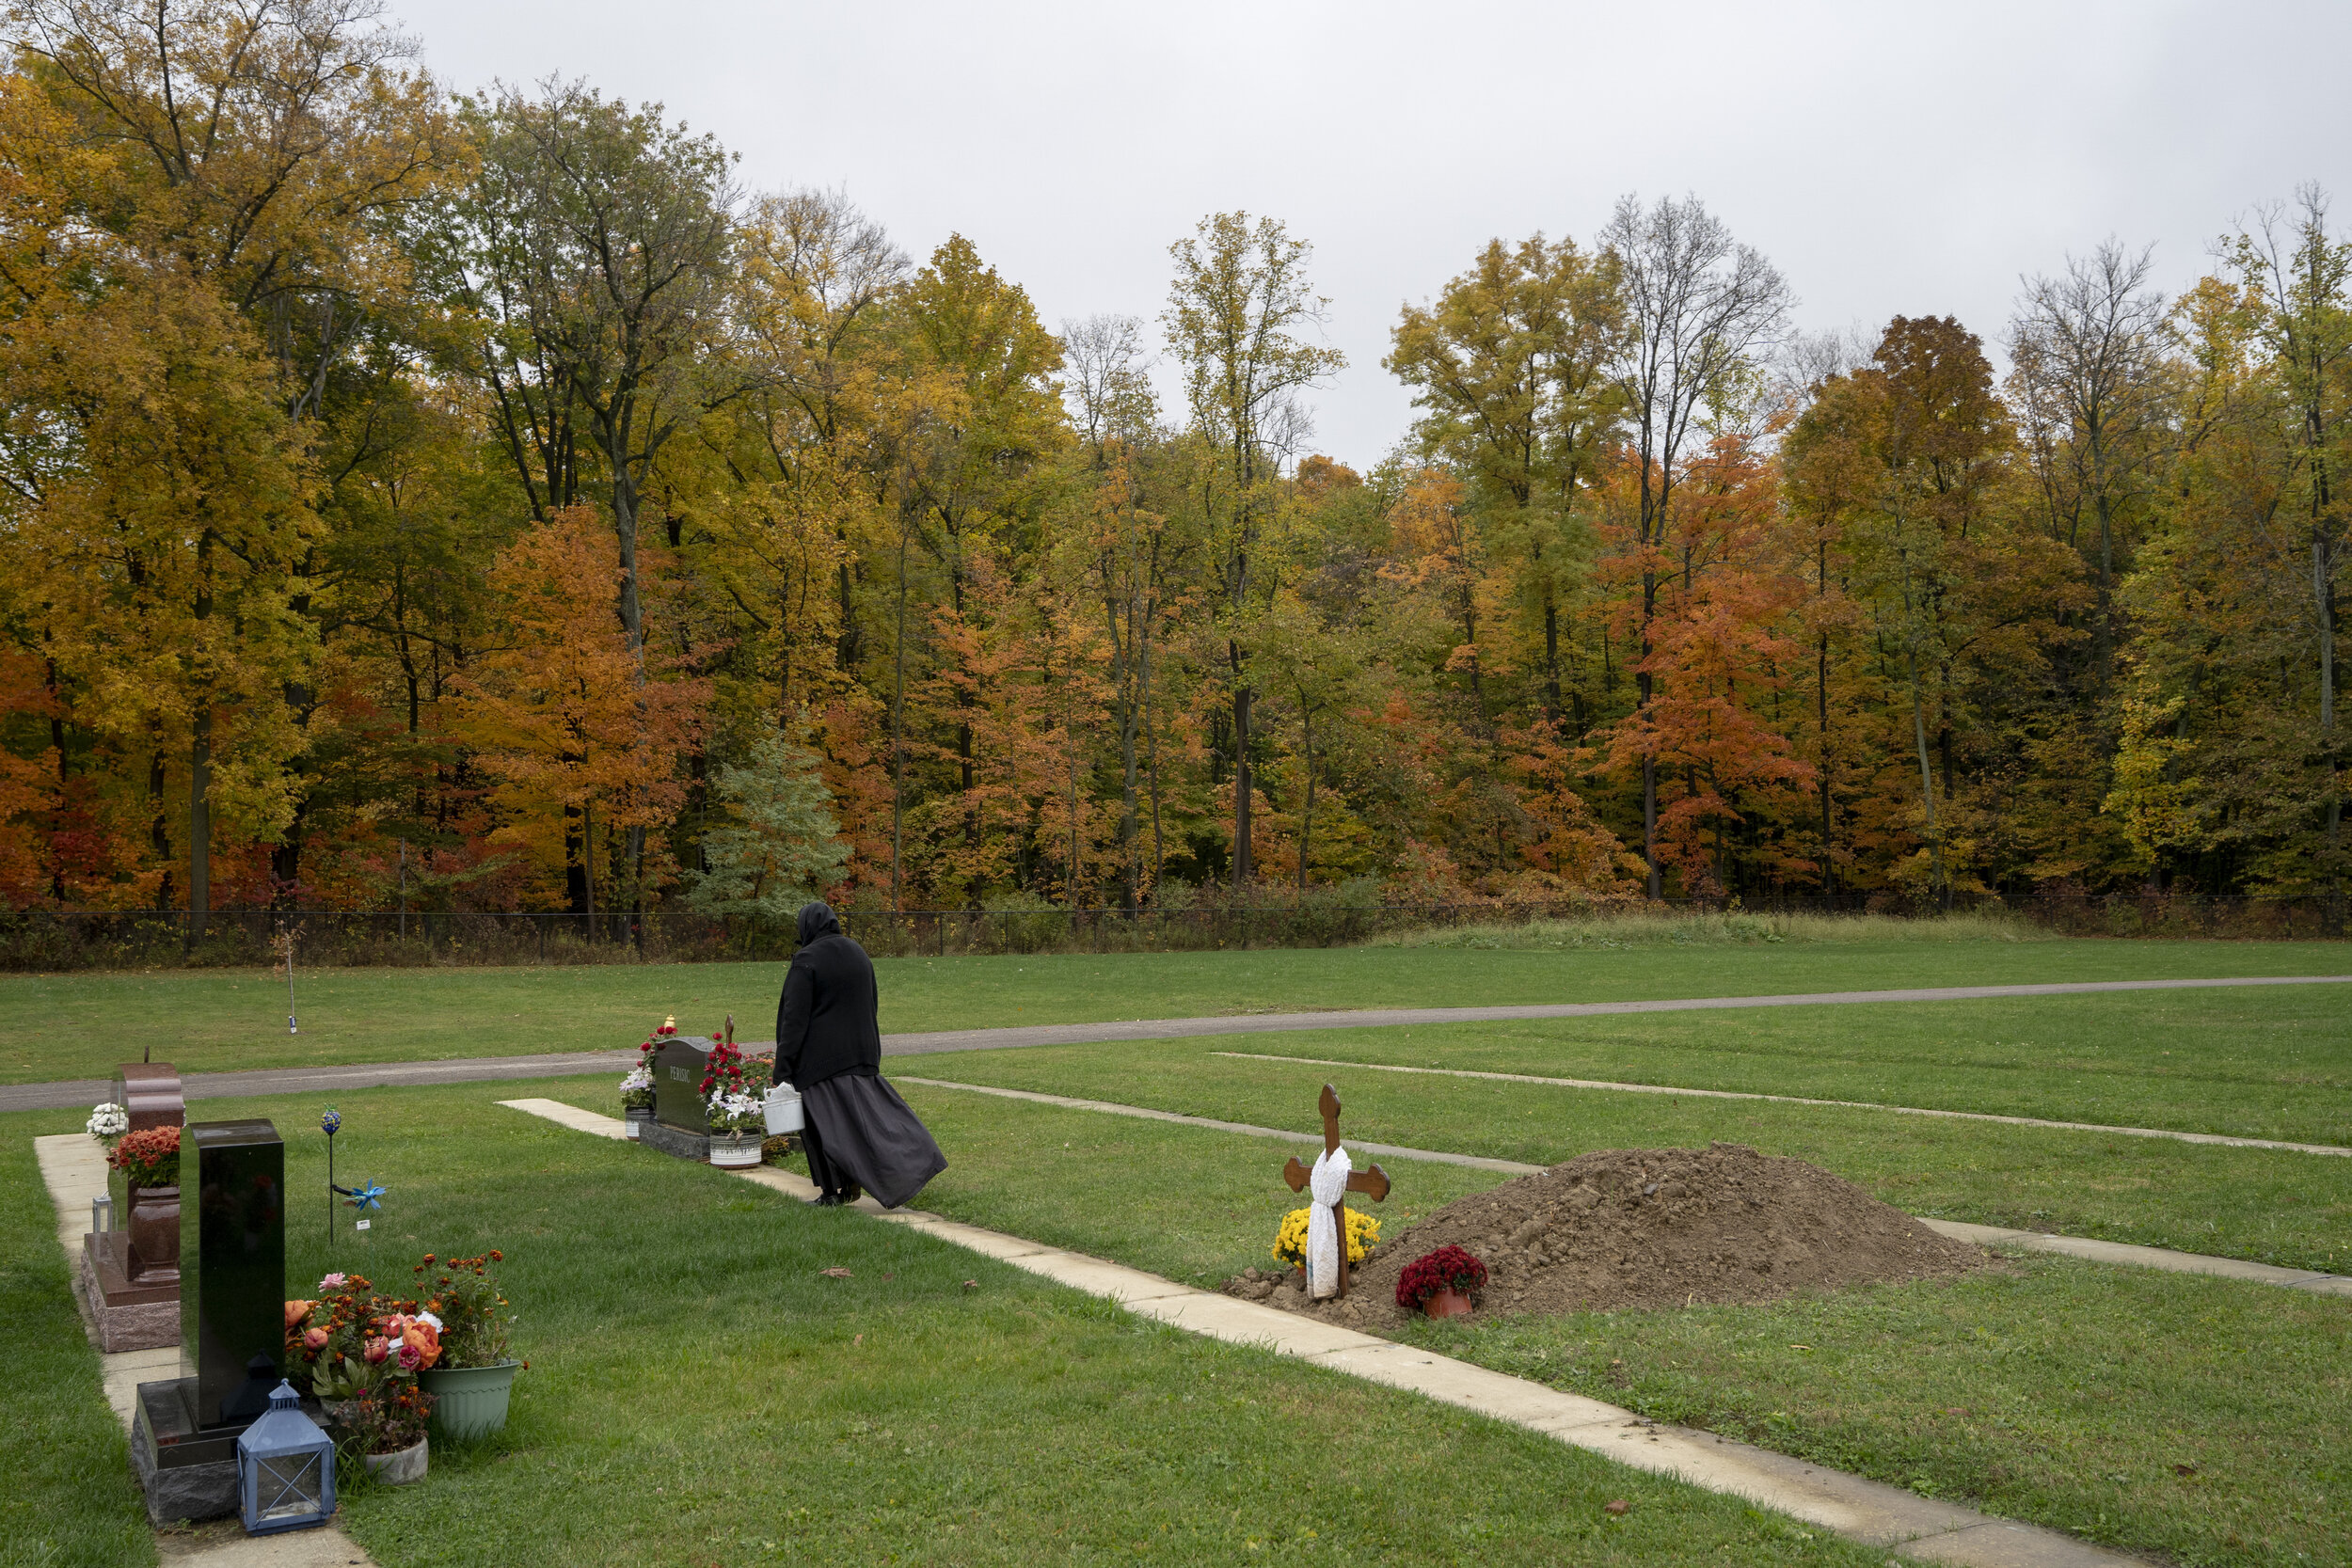  Sister Anastasia, 75, tends to the graves at Marcha Monastery, a Serbian Orthodox women’s monastery in Richfield, Ohio, where she is the only remaining nun, Oct. 20, 2020.  